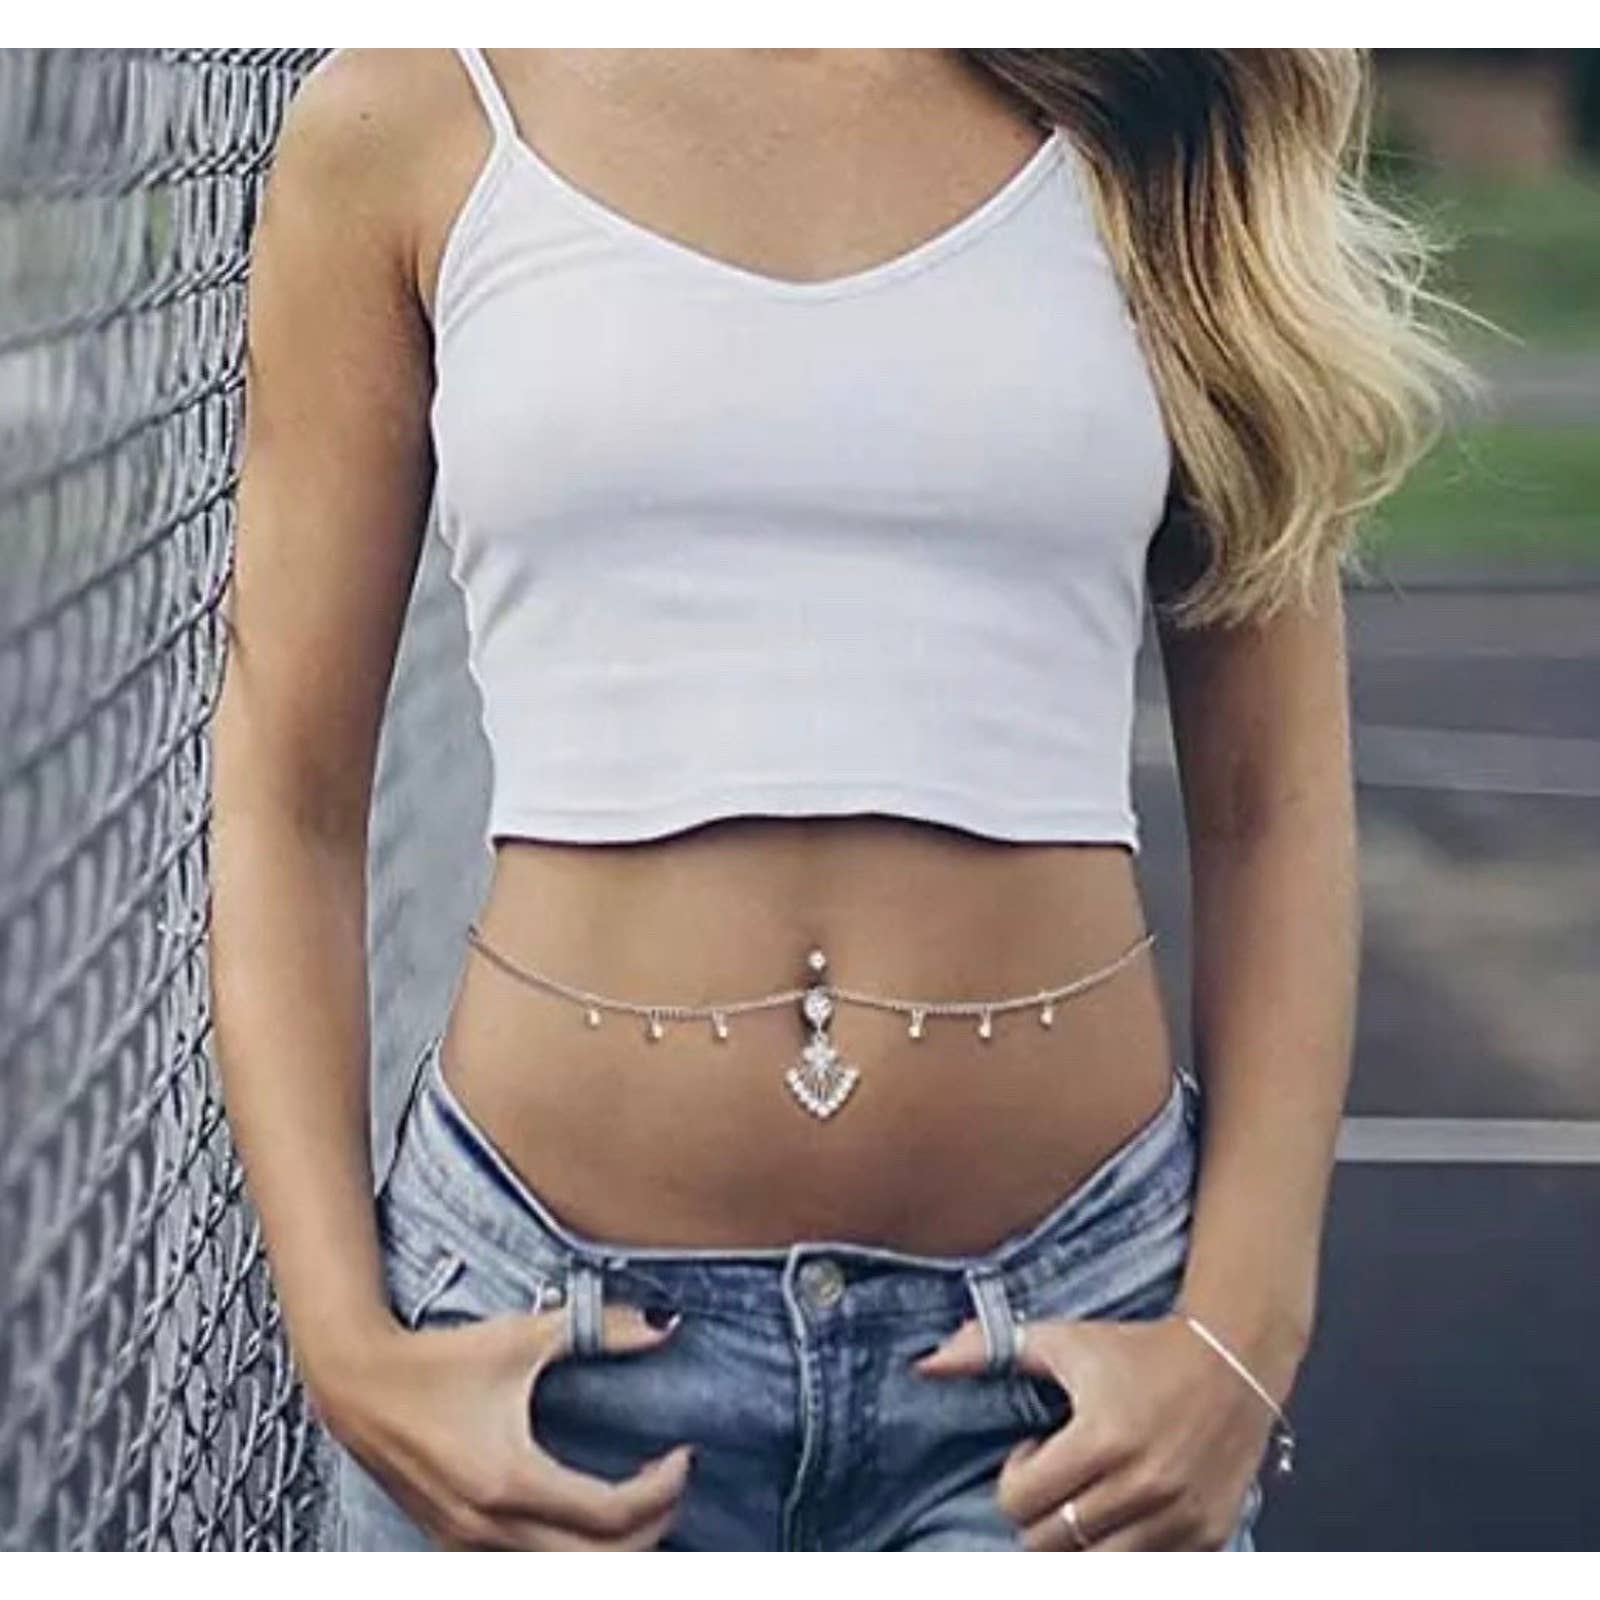 Belly Button Rings Are Back in 2021 Thanks to Gen Z